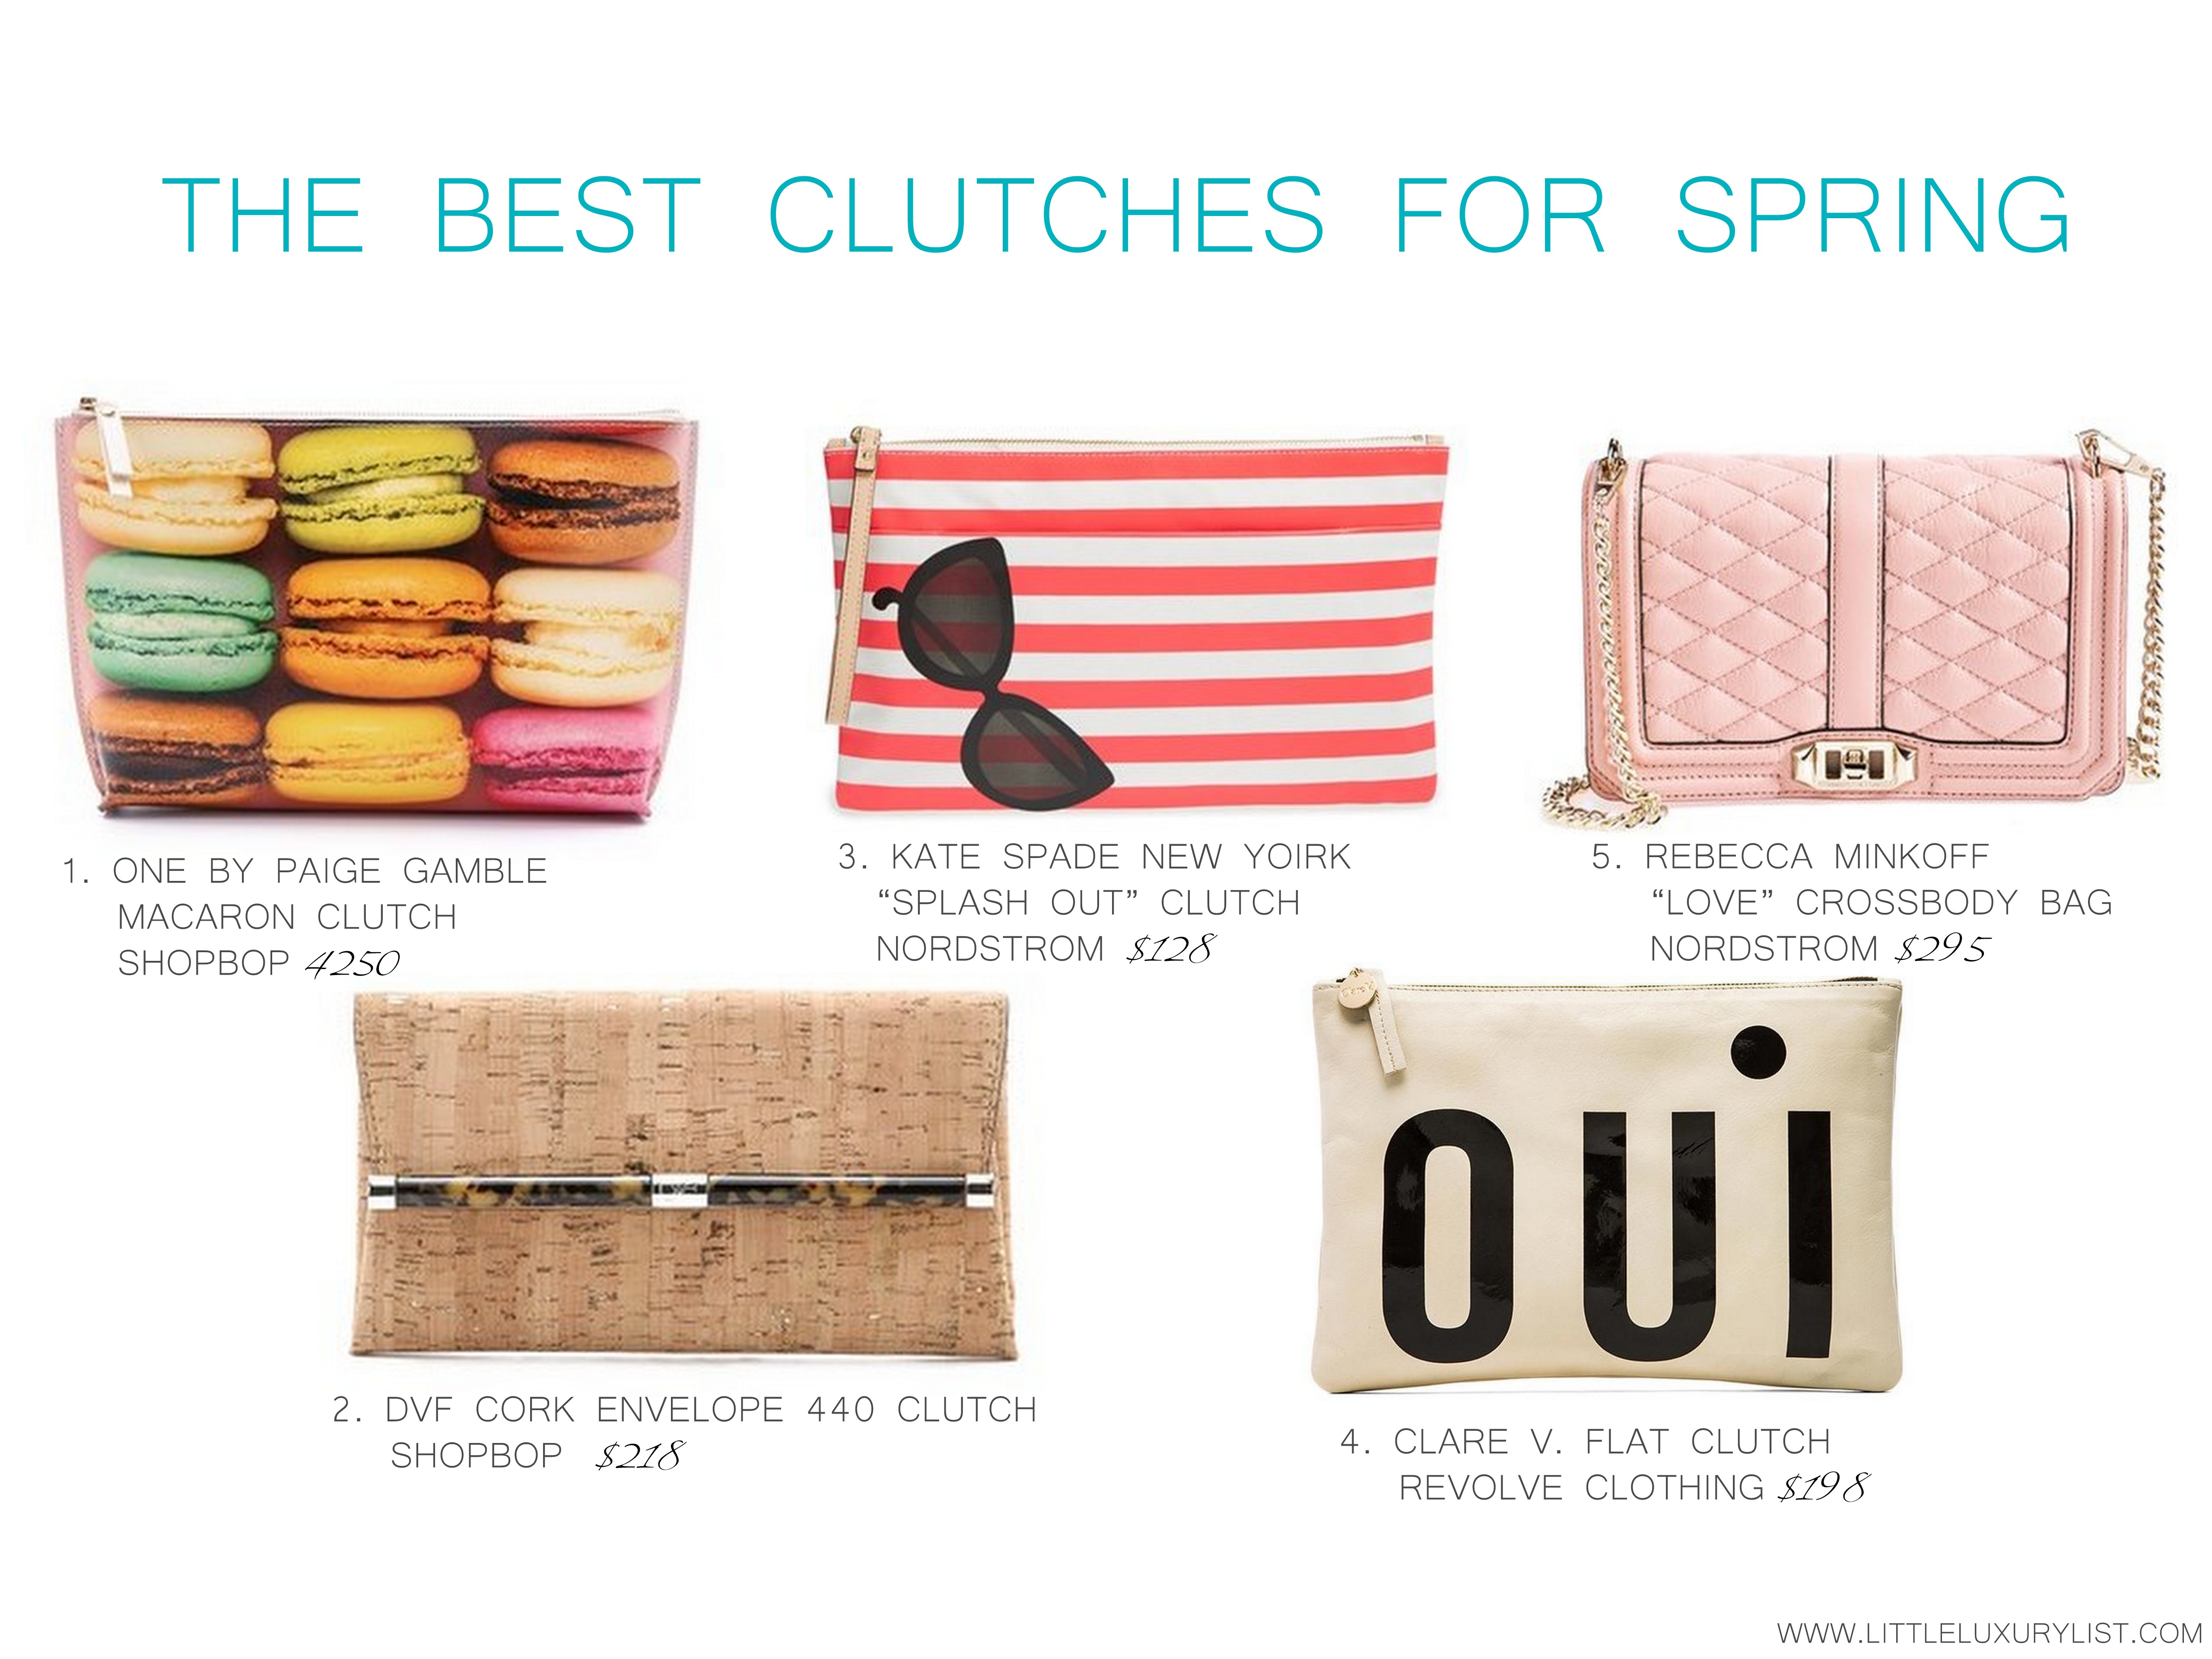 The best clutches for spring